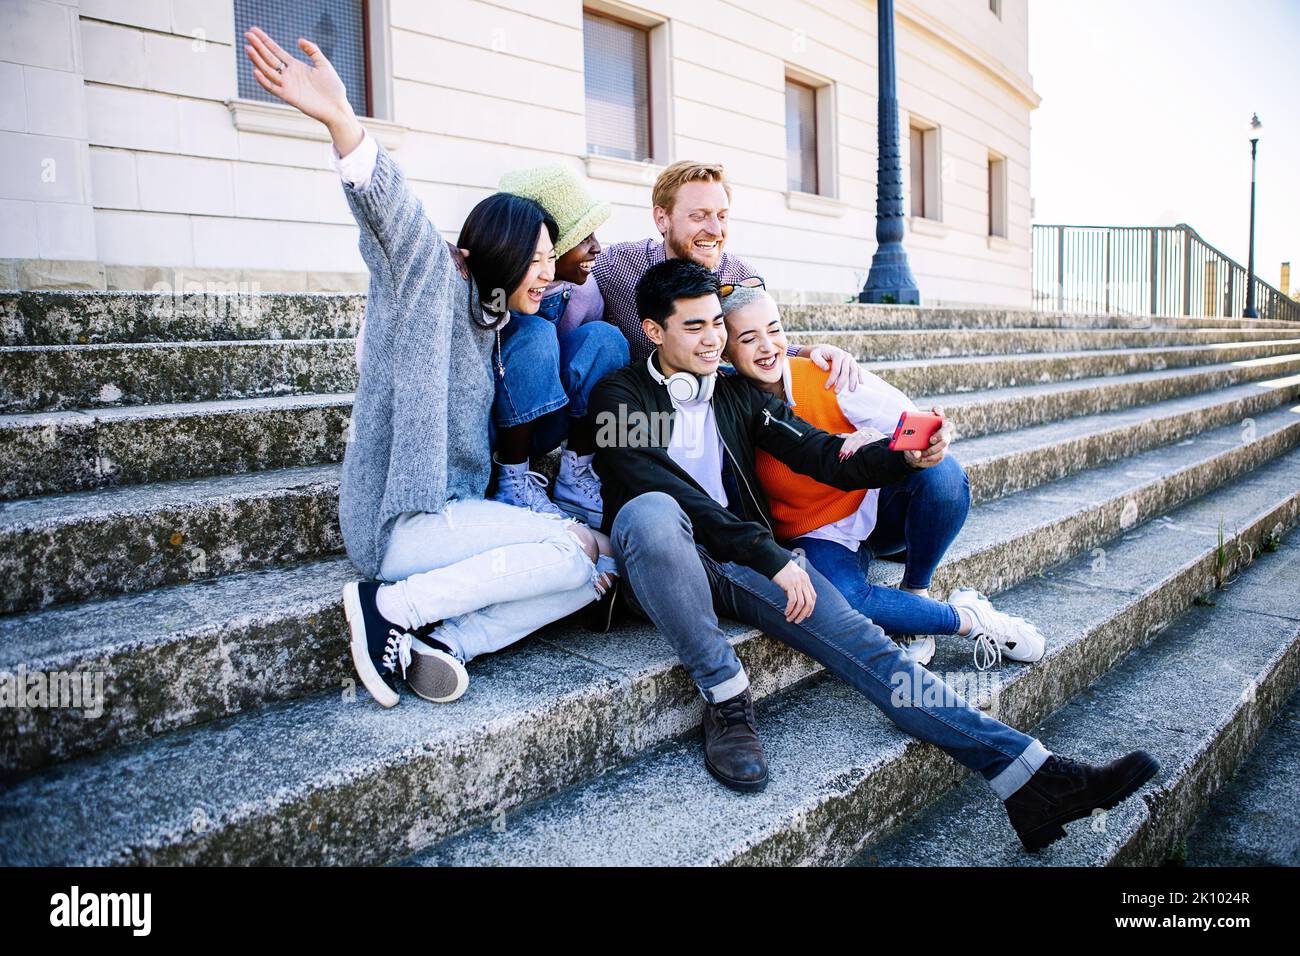 Happy smiling group of young friends taking selfie portrait together with phone Stock Photo